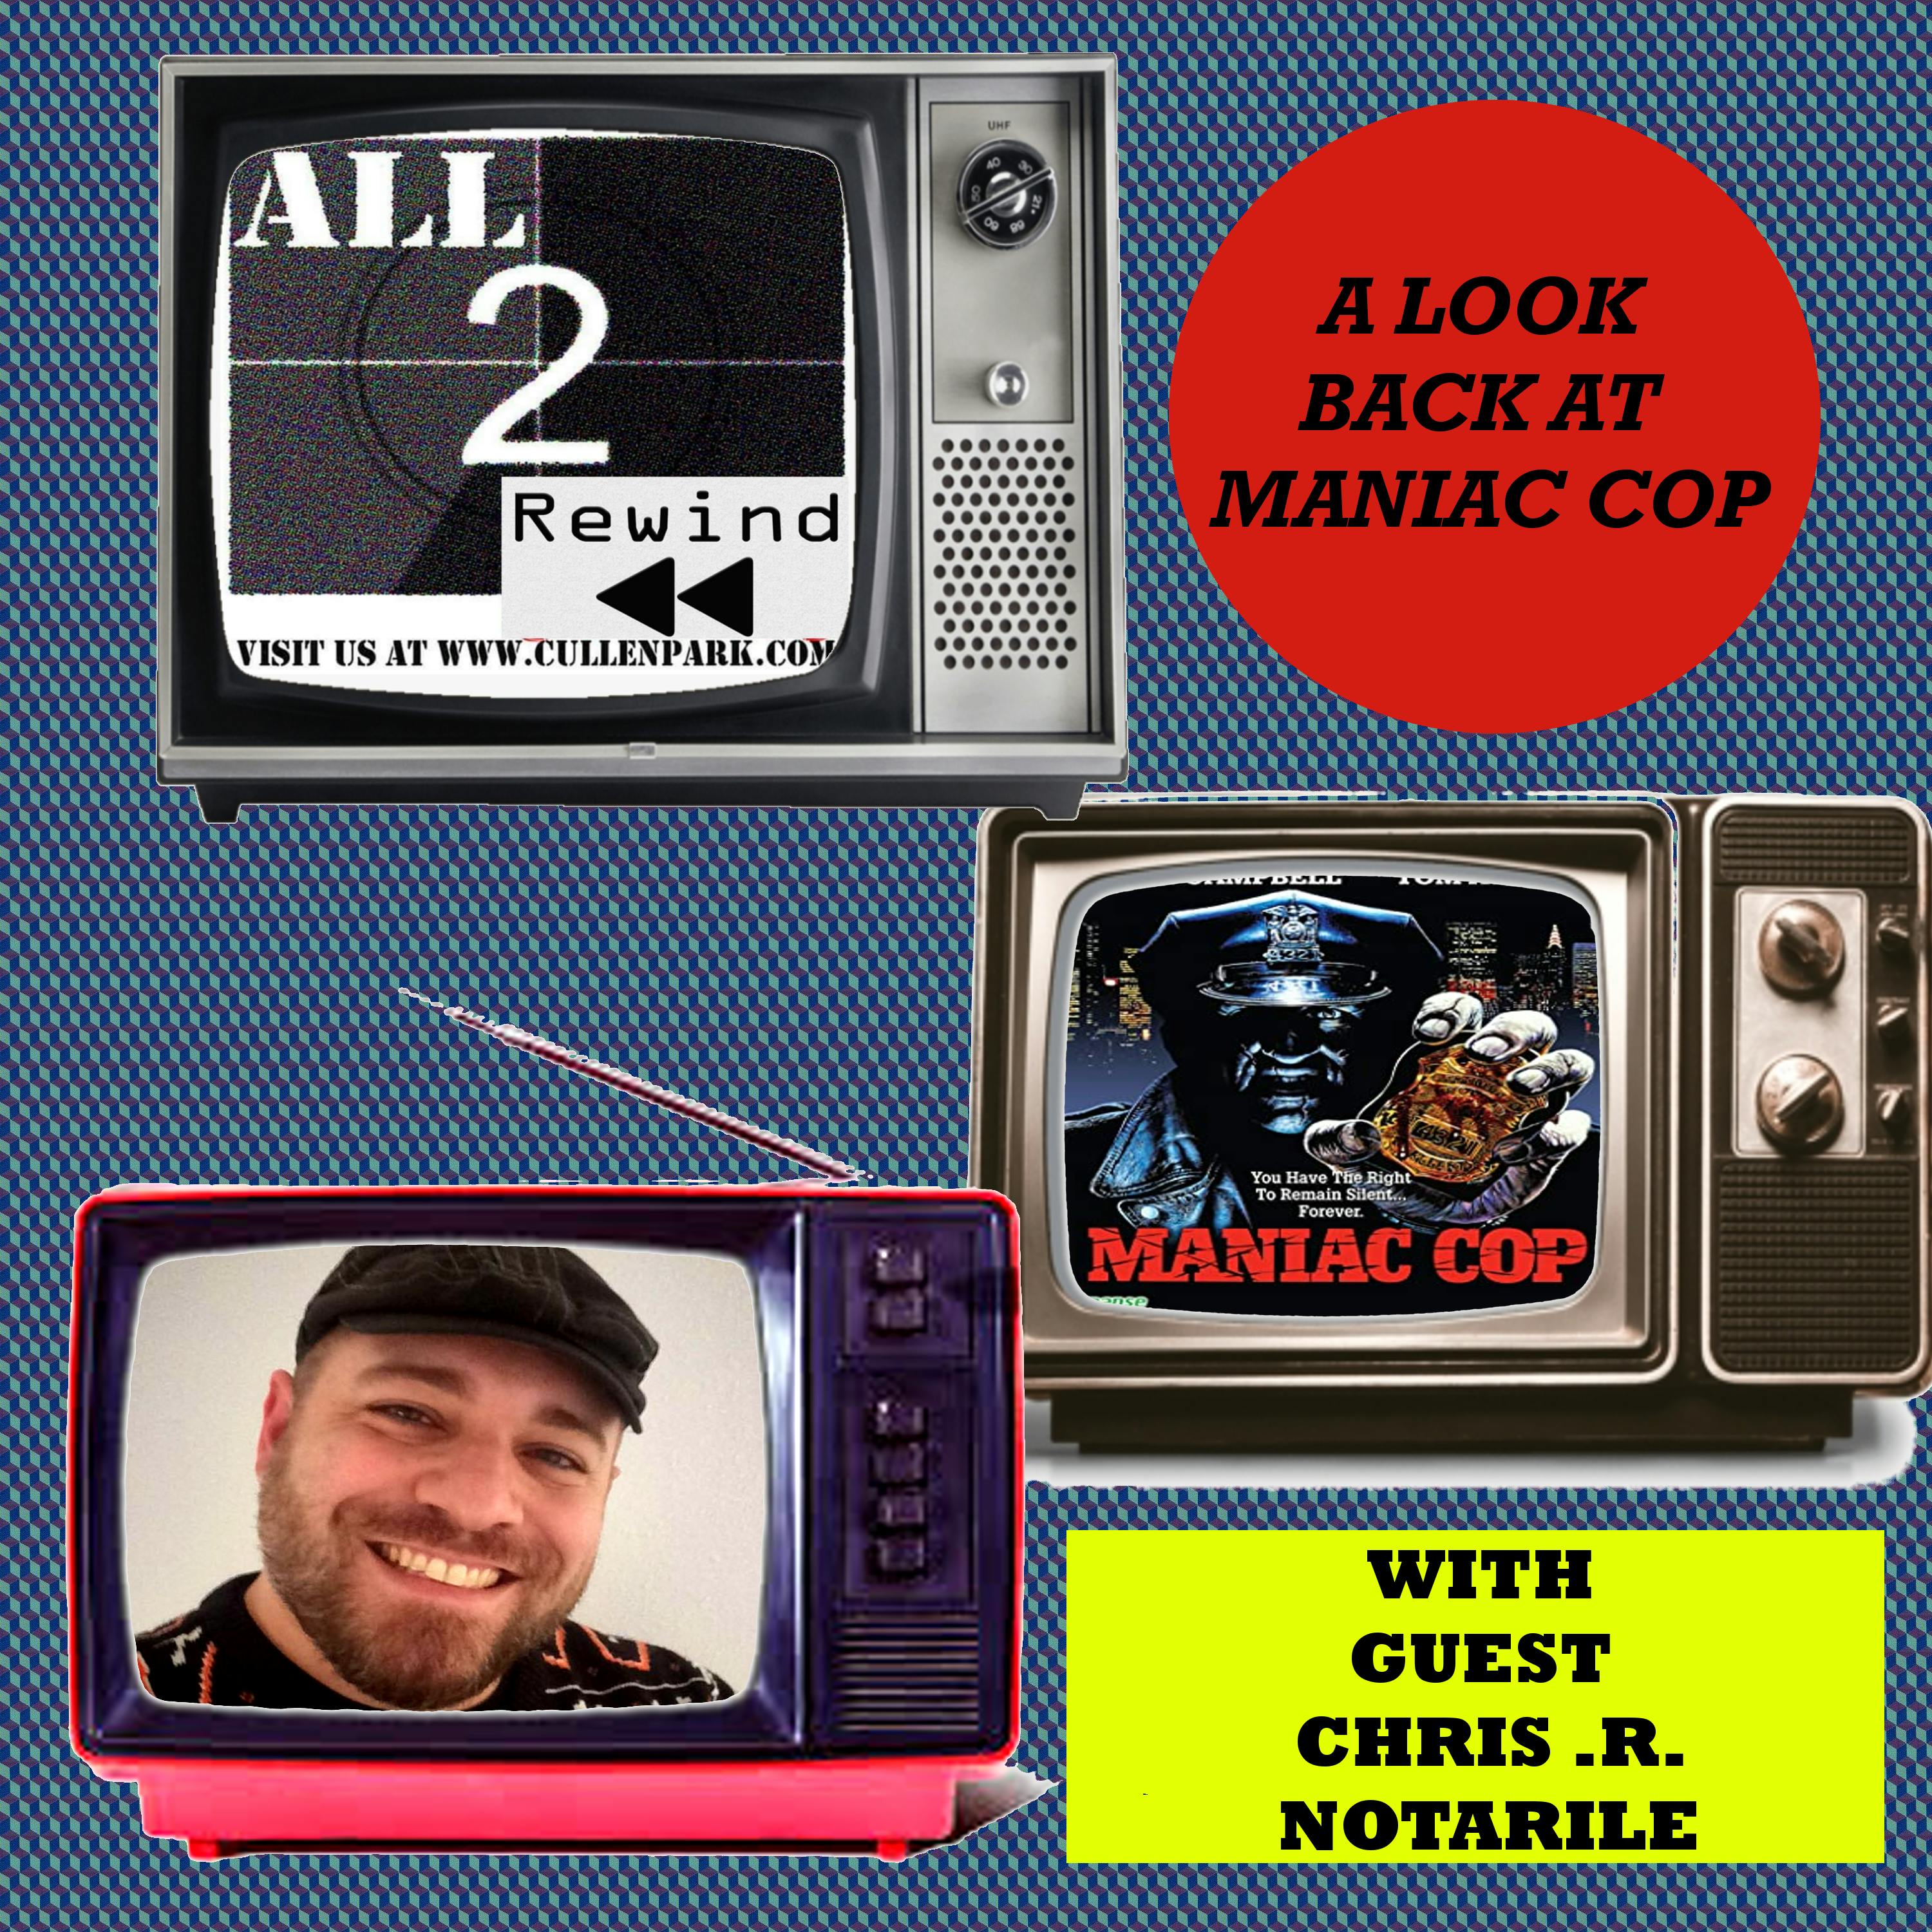 Maniac Cop (1988) - ALL2REWIND REVIEW Image